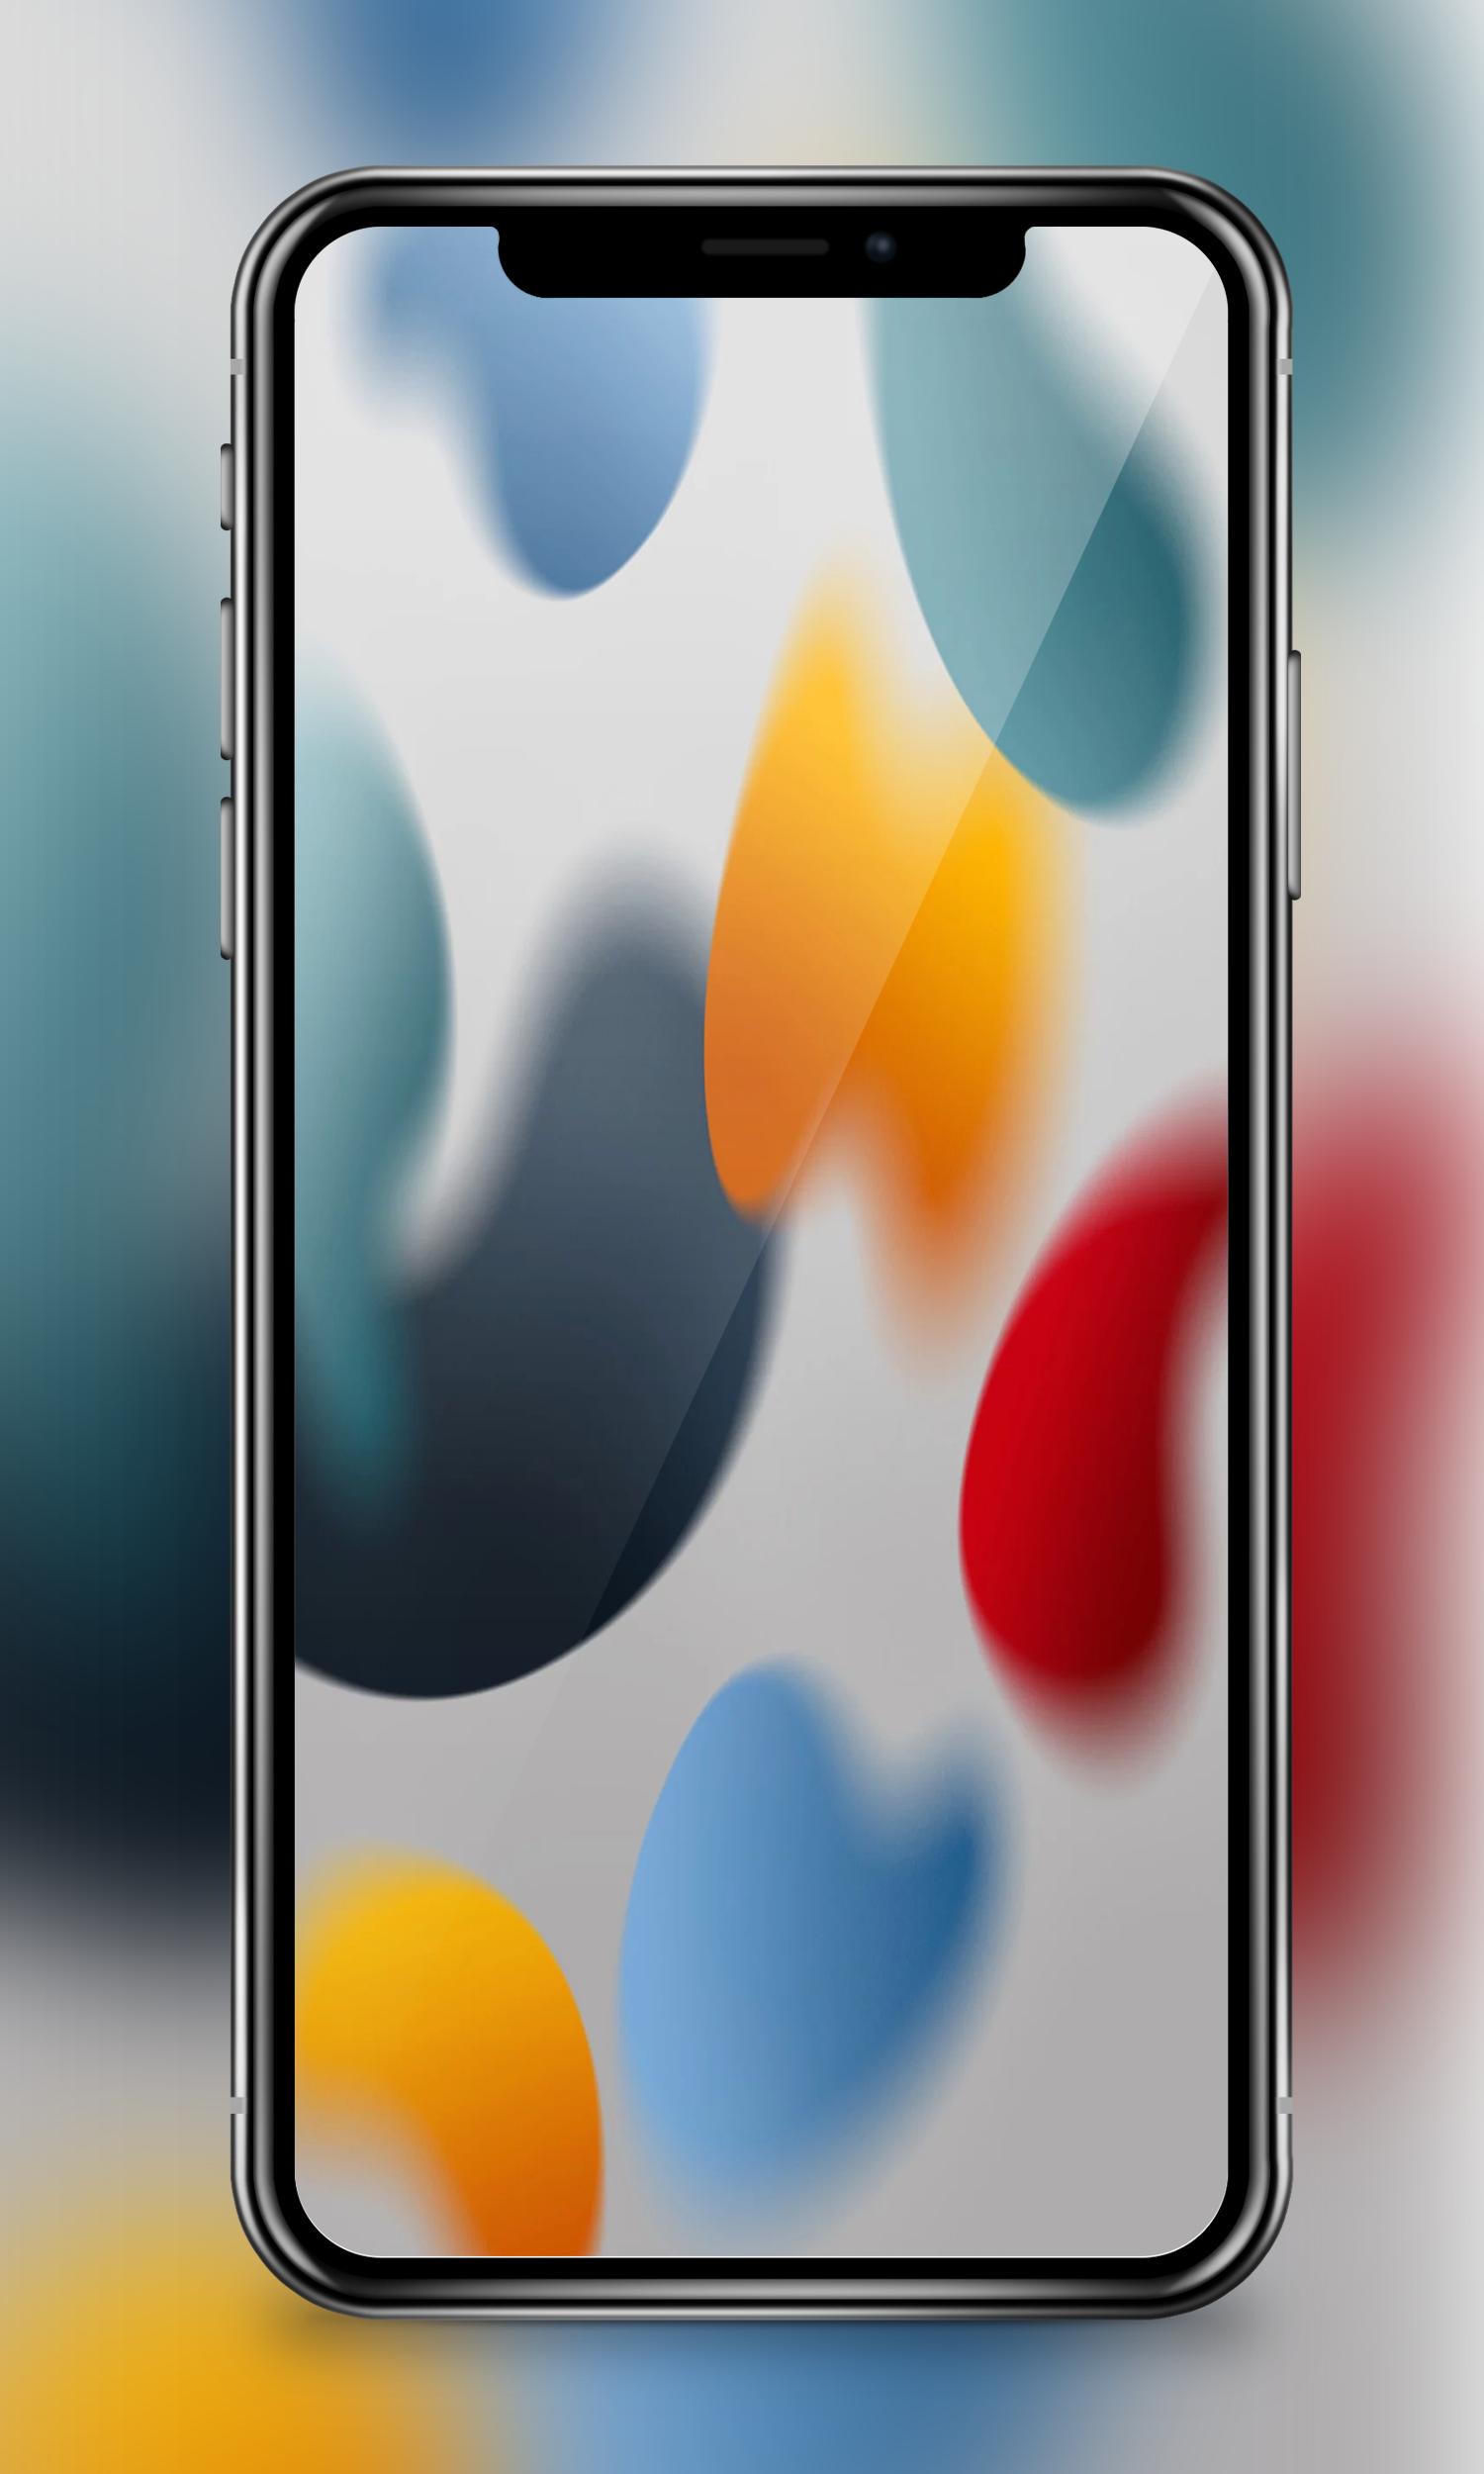 Ios 15 Wallpaper Iphone 13 Hd Concept For Android Apk Download